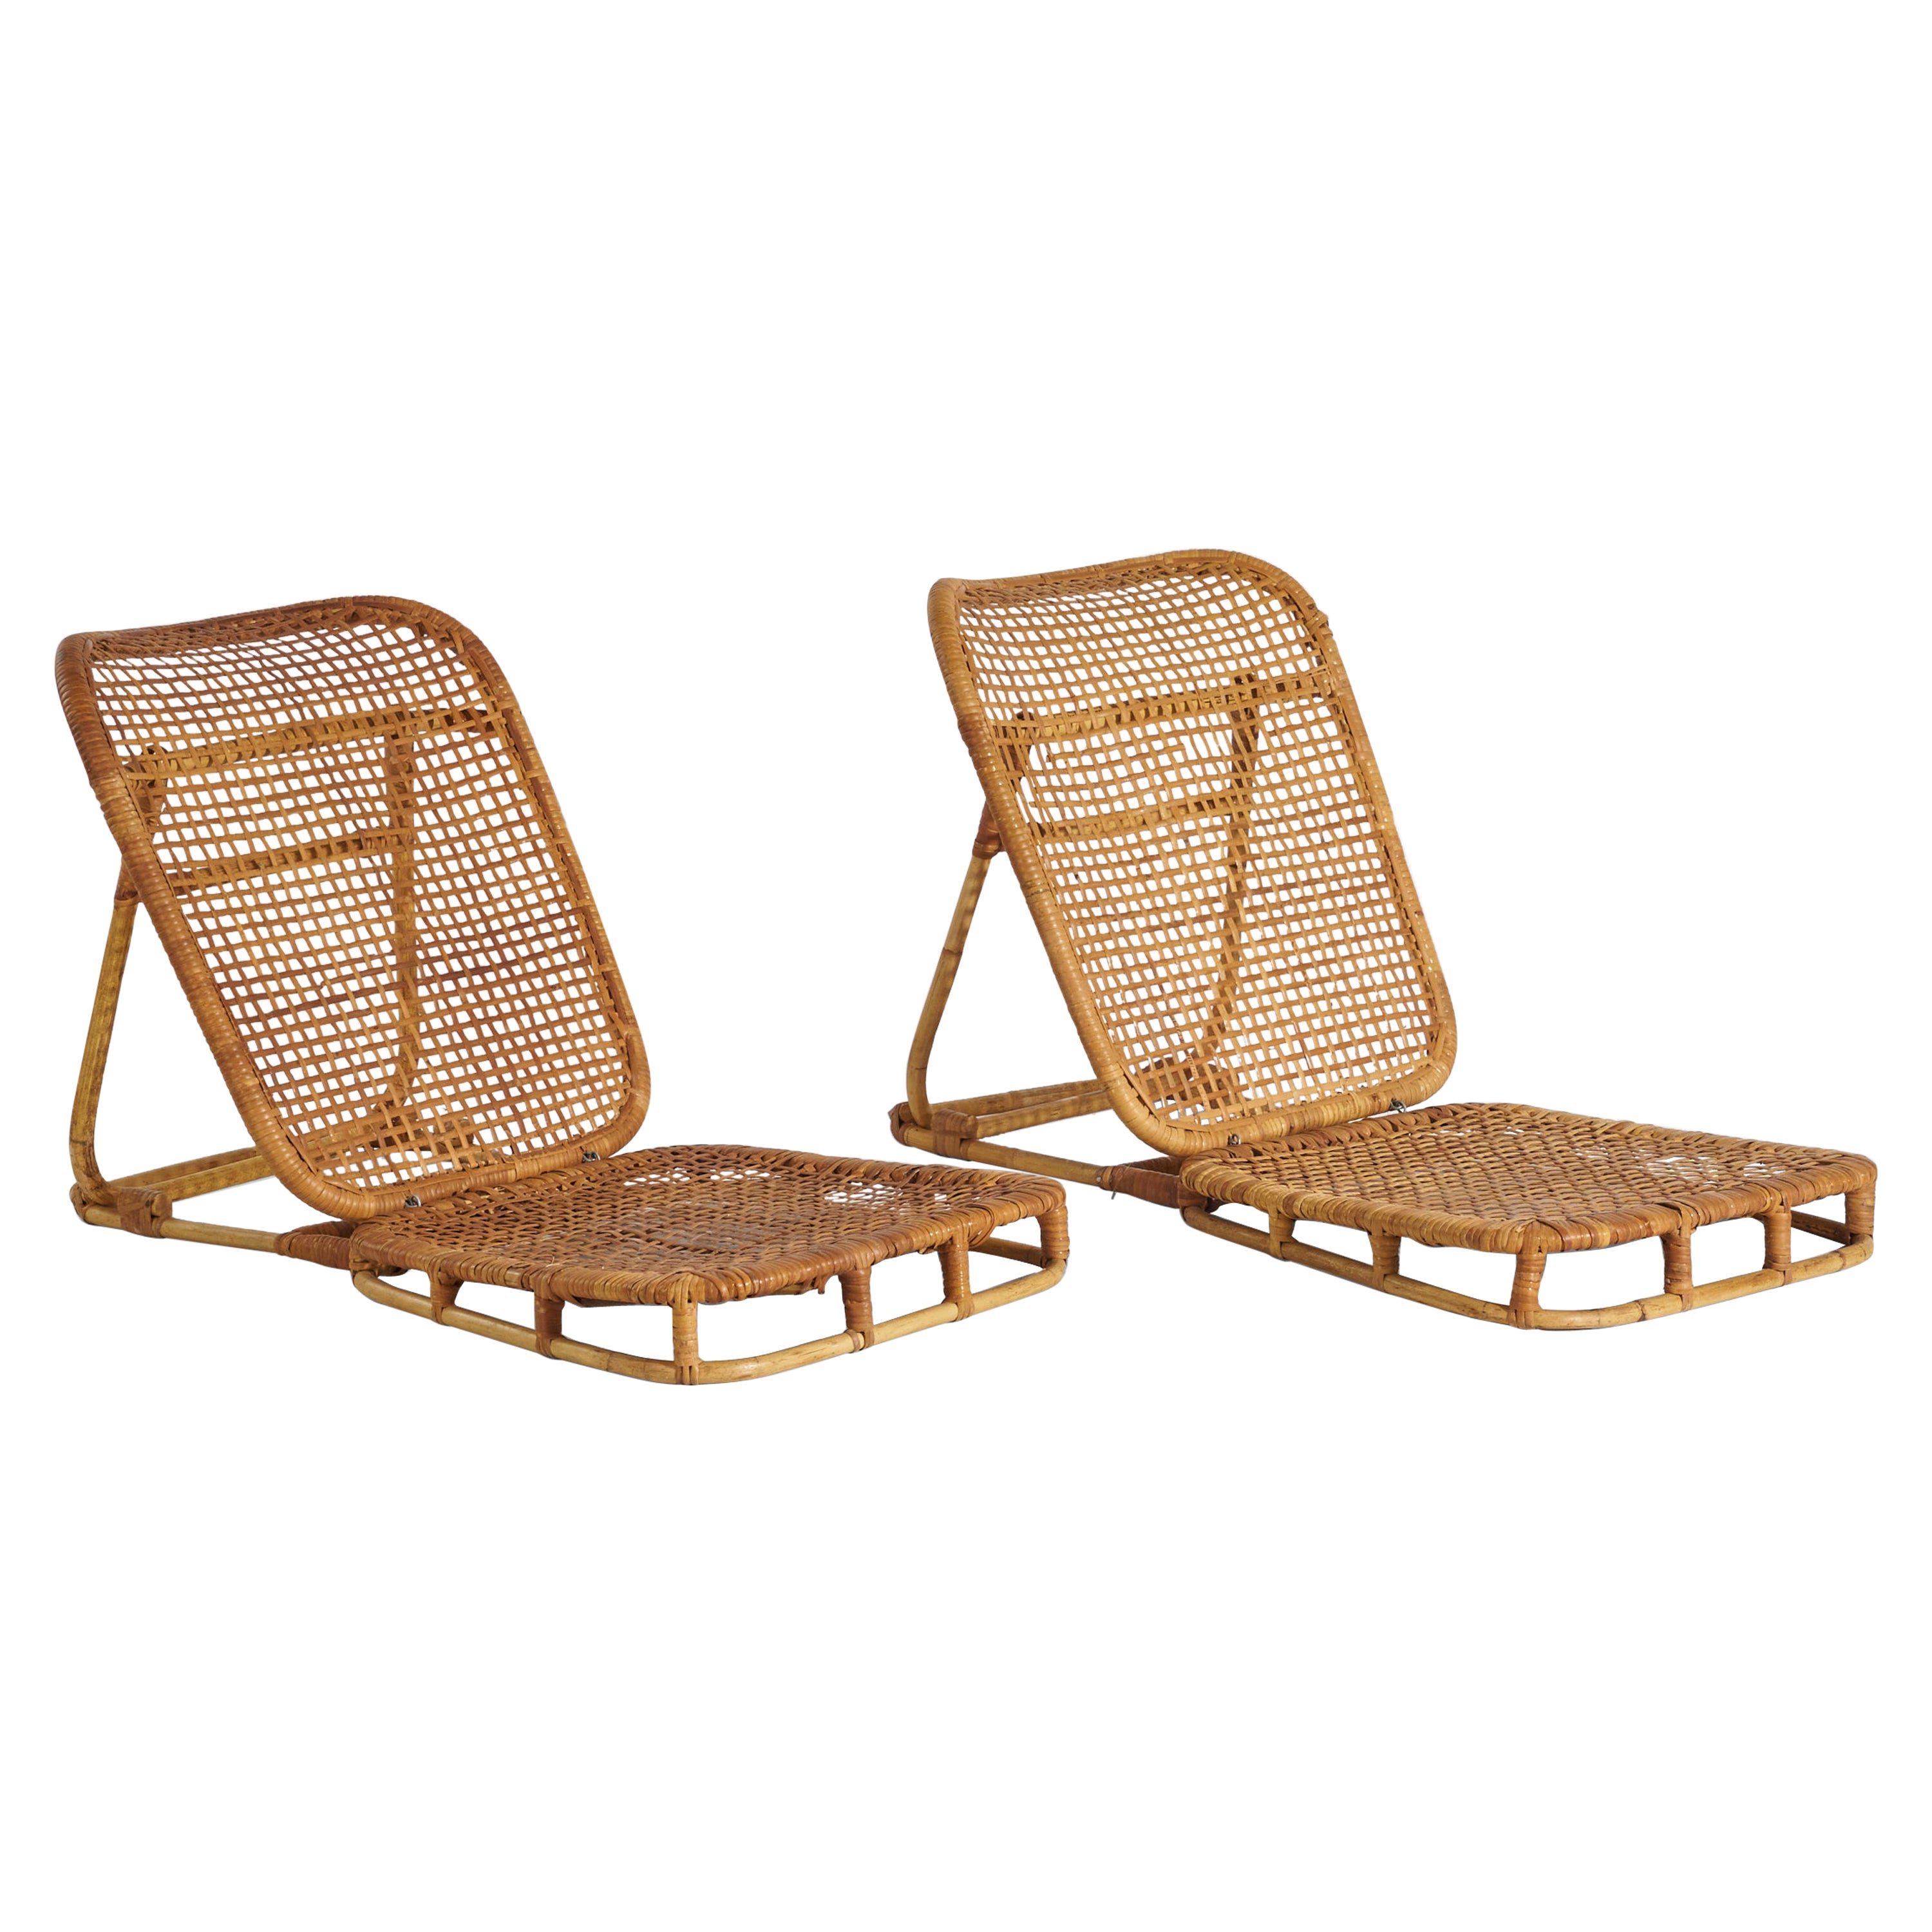 Calif-Asia, Low Foldable Chairs, Rattan, USA, 1960s